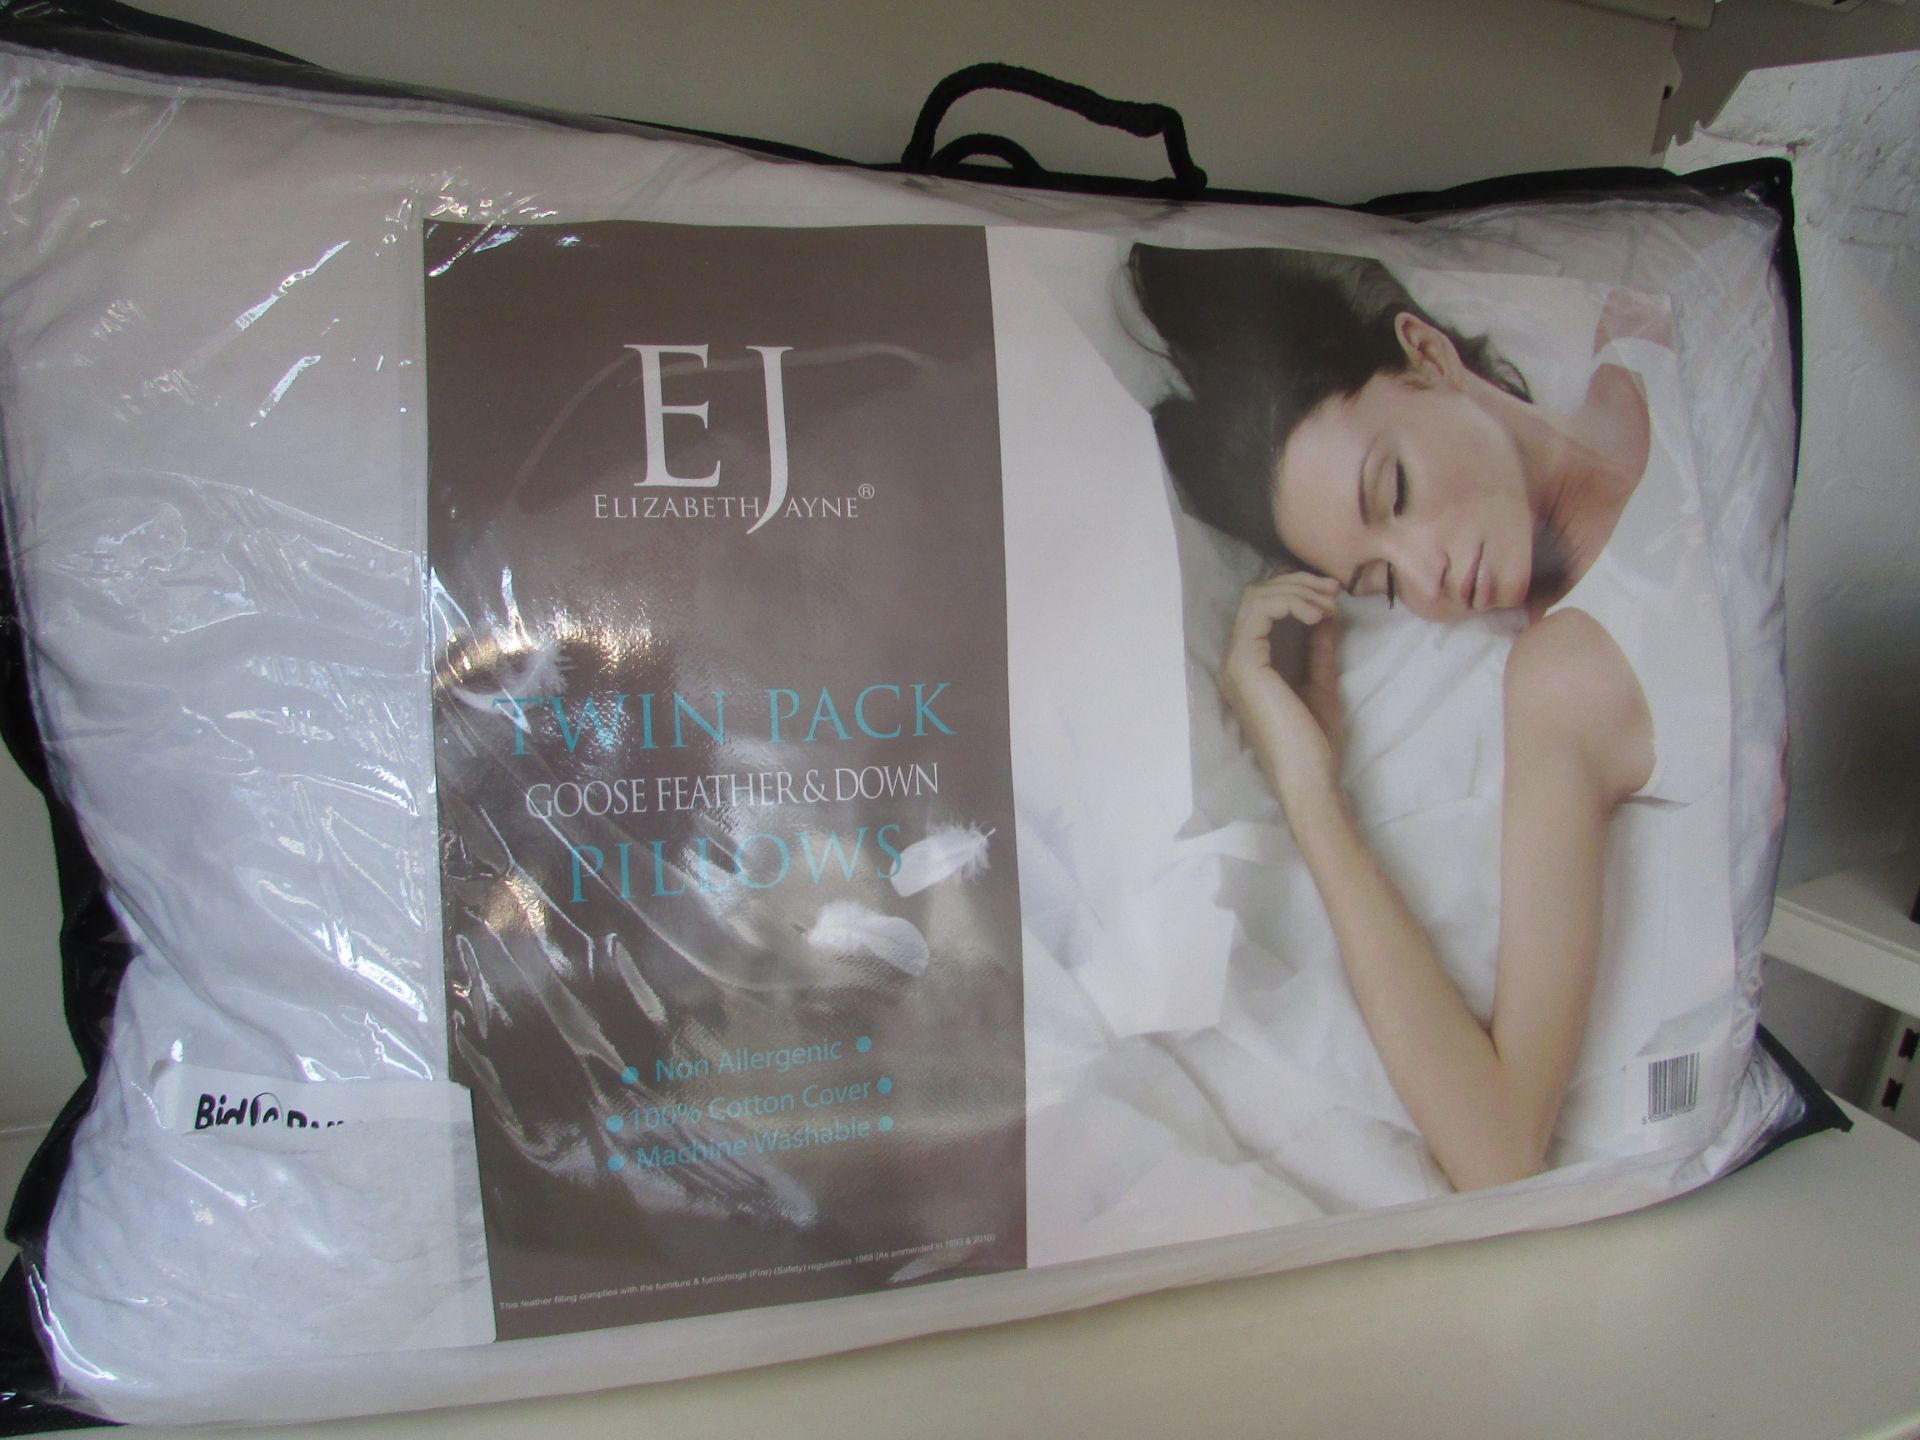 Elizabeth Jayne Pack of 2 Goose Feather & Down Pillows